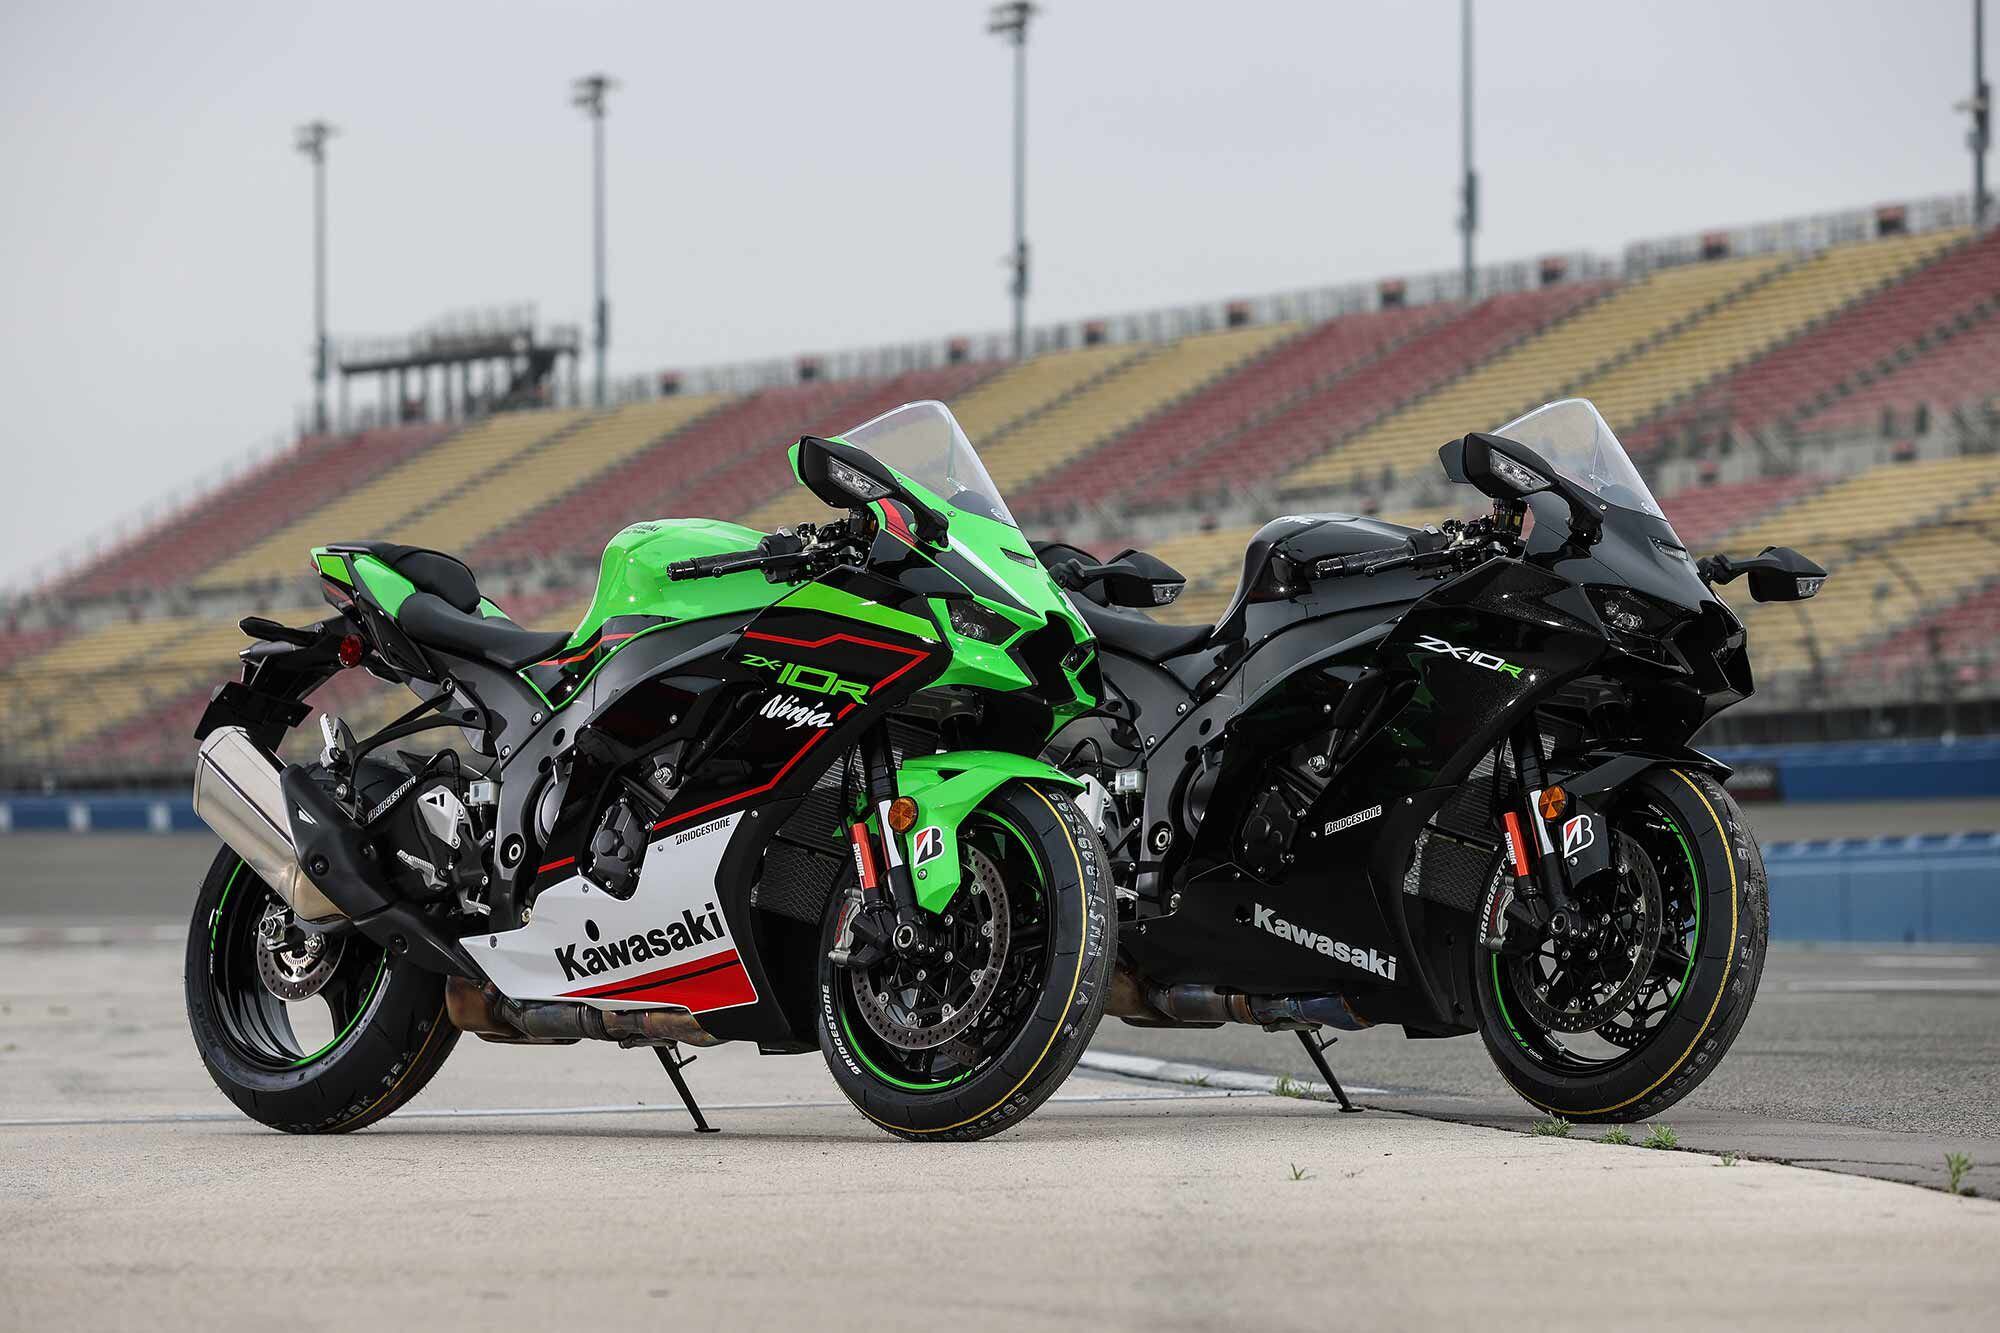 The 2021 Ninja ZX-10R is available Stateside as a non-ABS model for $16,399. Kawasaki offers an ABS-equipped version for $17,399.